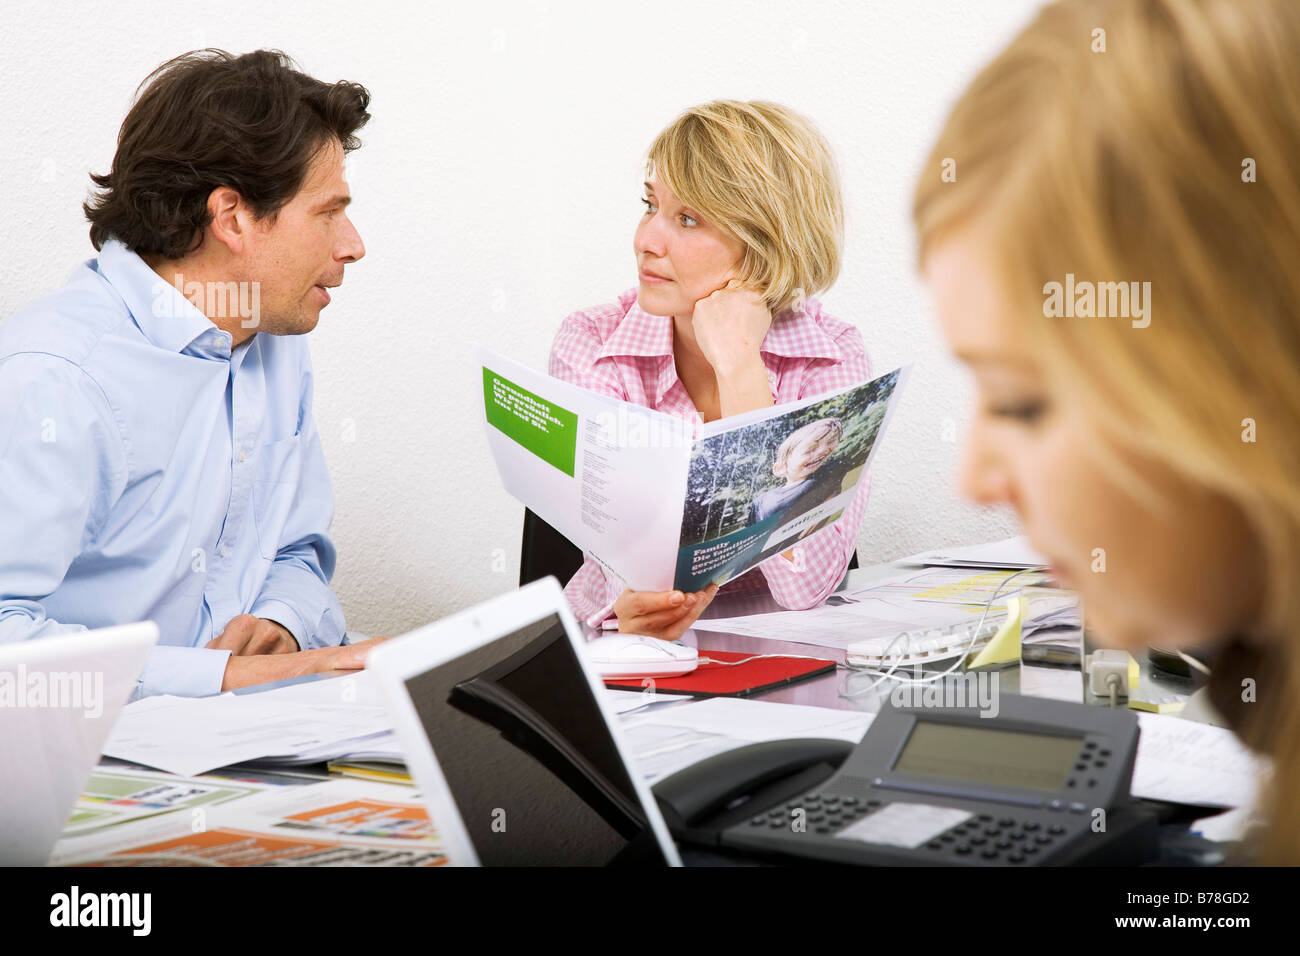 Employees of an advertising agency discussing an ad brochure and blueprints of an ad campaign, Zurich, Switzerland, Europe Stock Photo